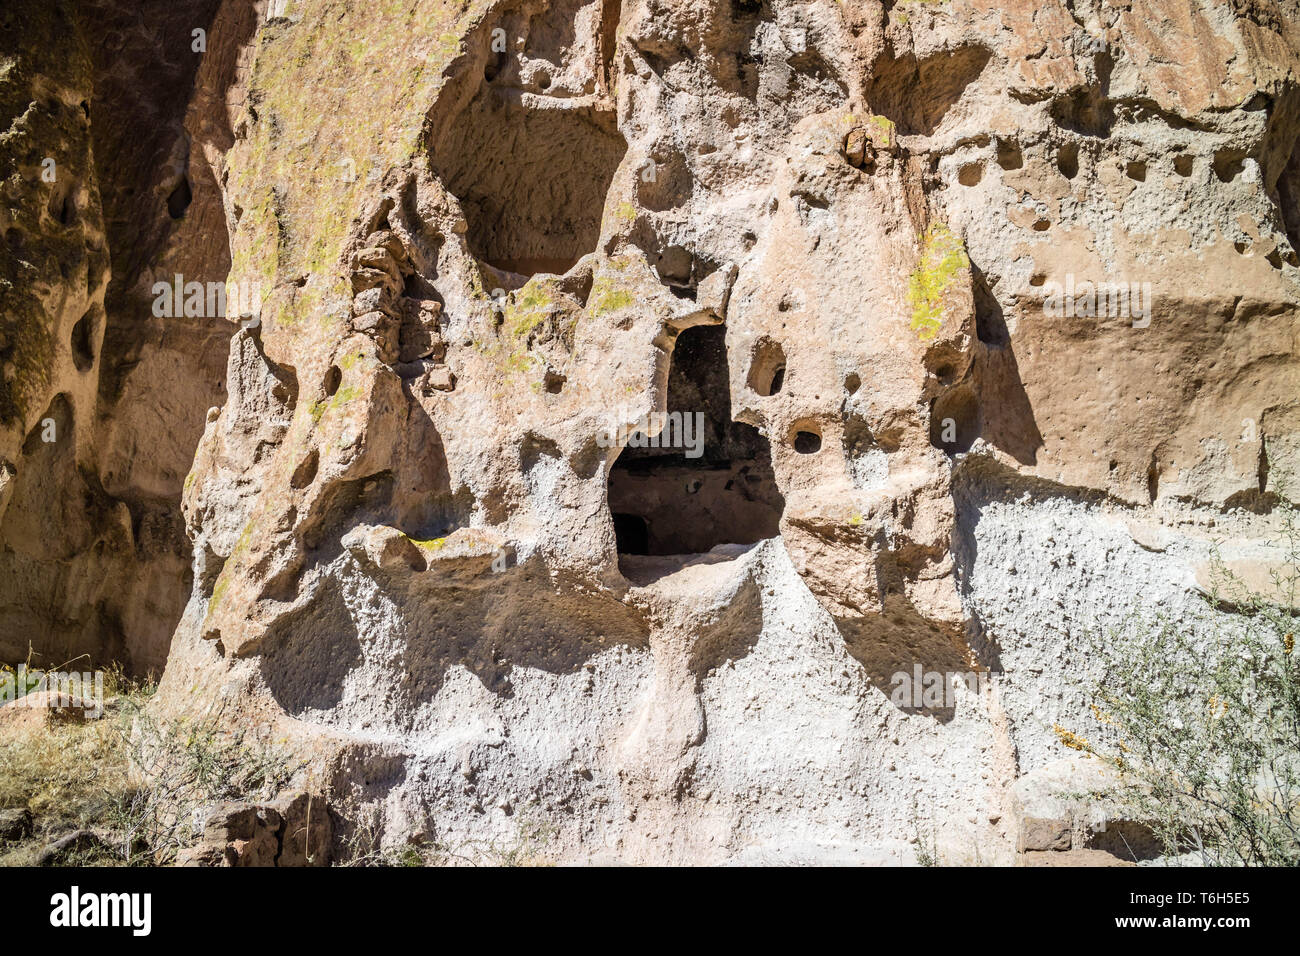 Cliff Dwelling Ruins in Bandelier National Monument, New Mexico Stock Photo